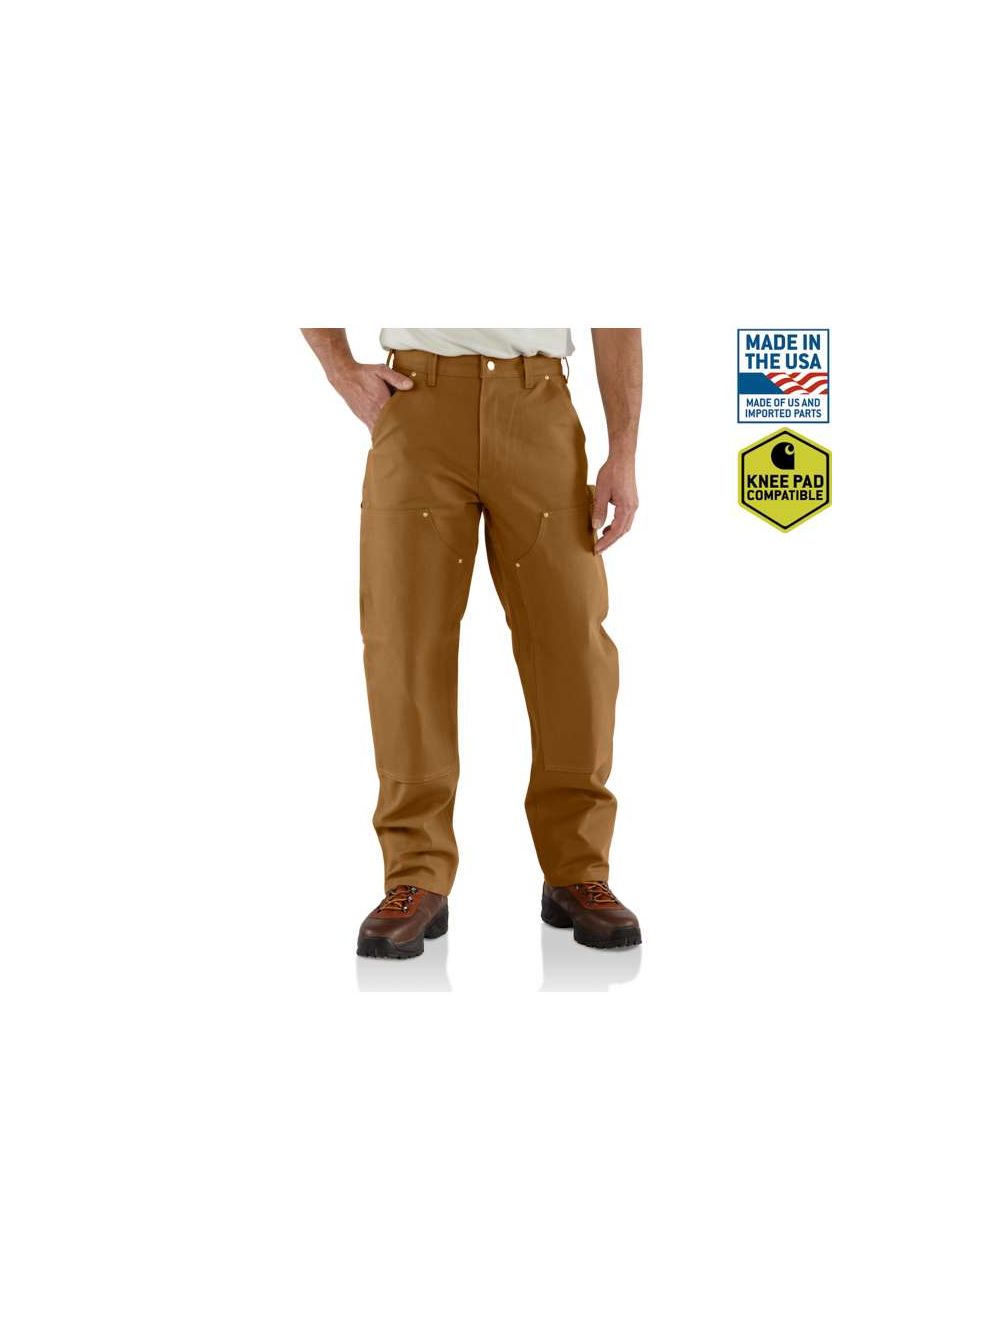  Carhartt Mens Firm Duck Double-Front Work Dungaree Pant B01